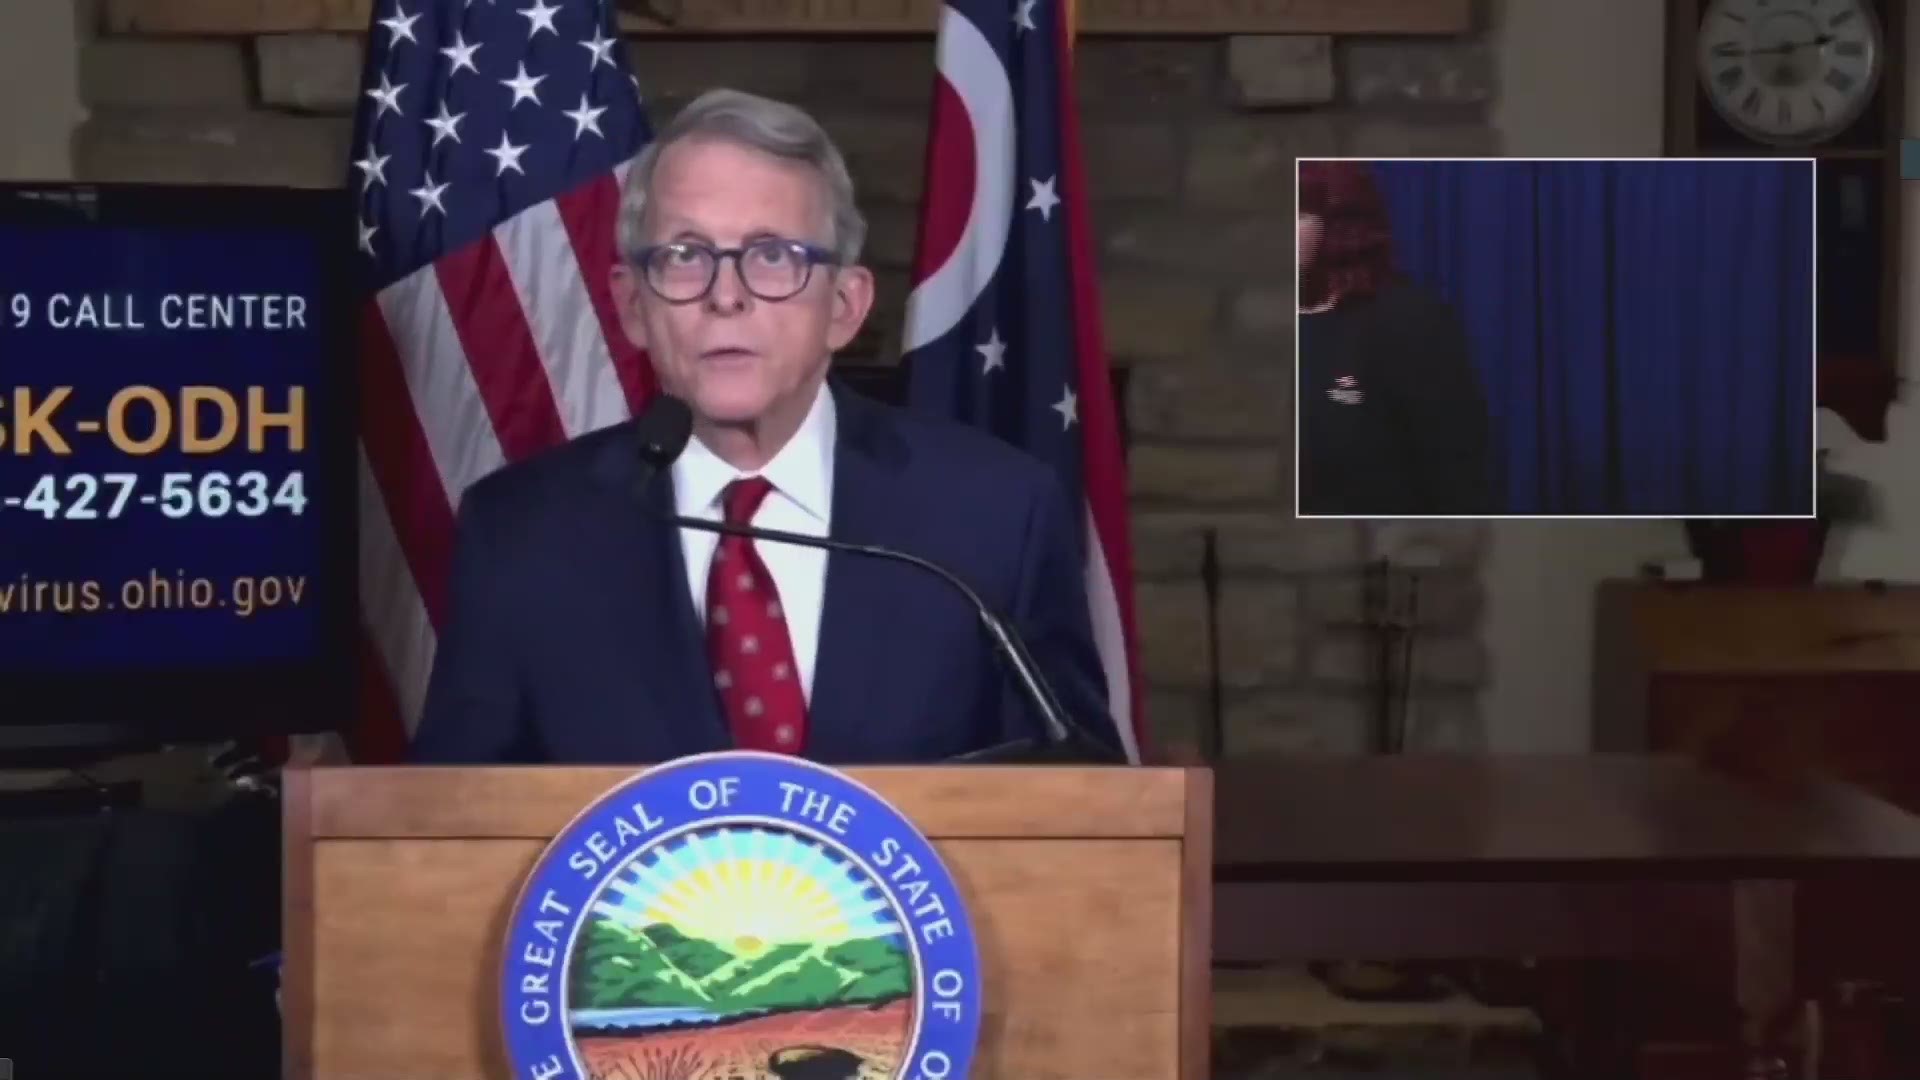 The bill eliminates a duty to retreat before firing in self-defense at any place. DeWine reversed course on his veto warning.